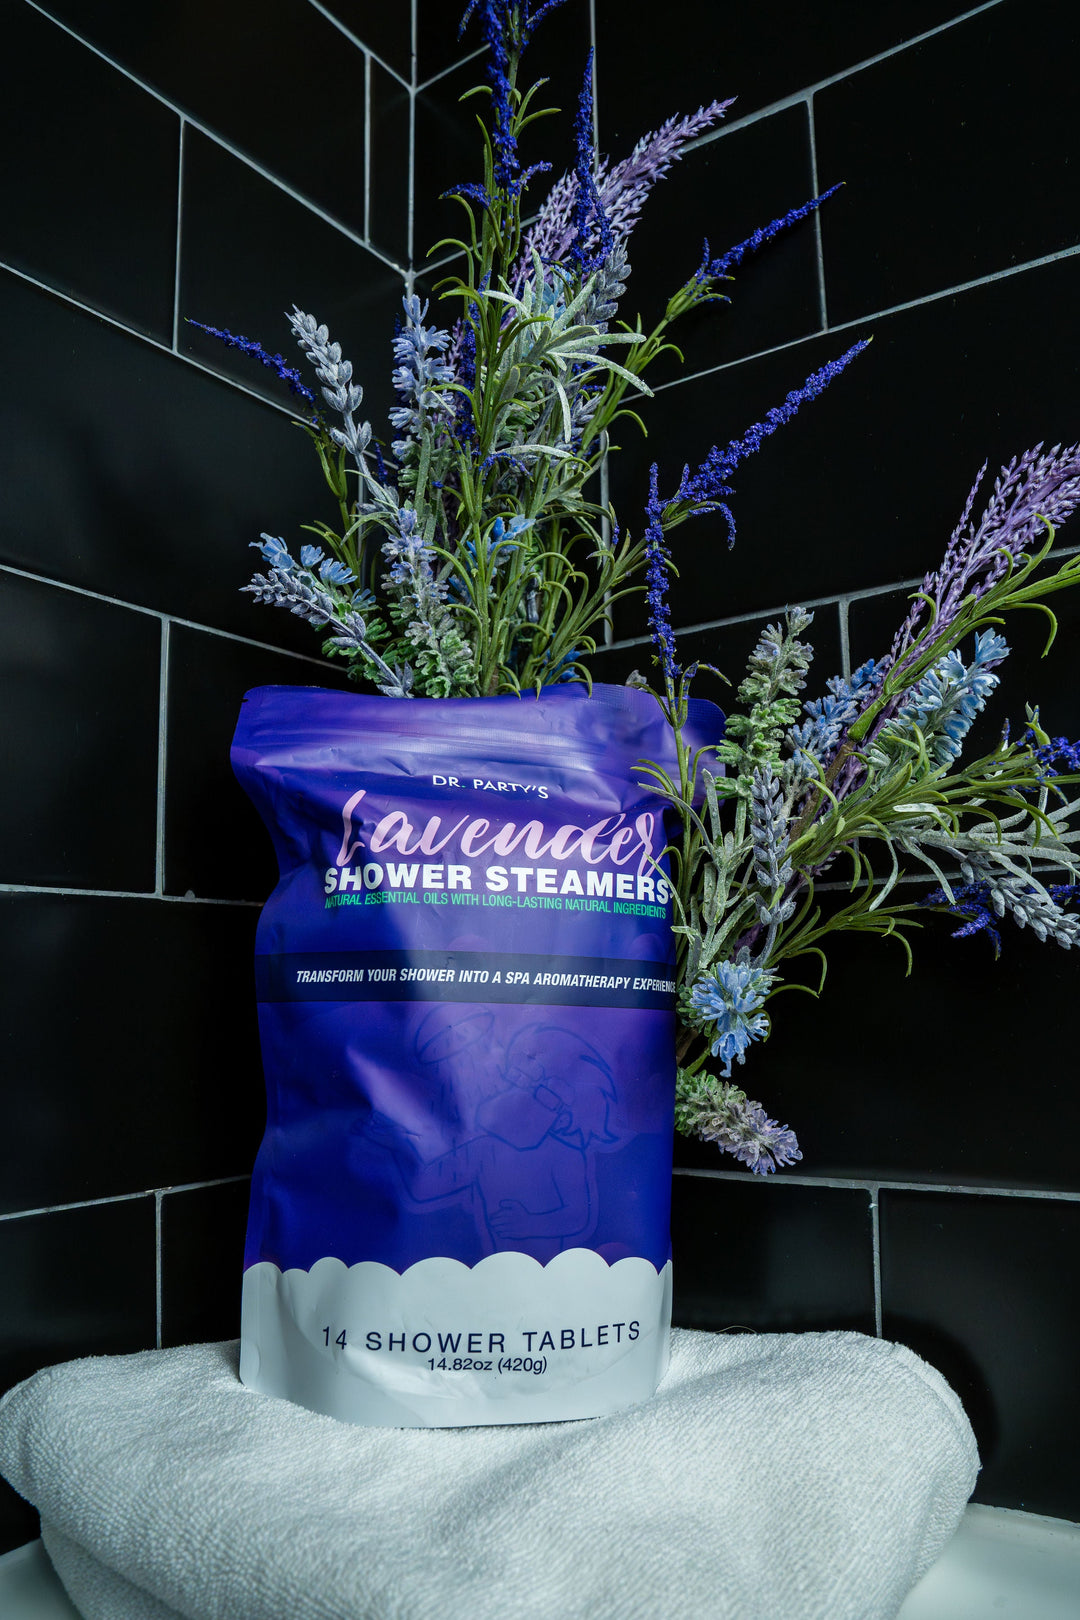 Our lavender shower steamers offer a sublime escape into spa-like relaxation, with each pack containing 14 tablets that disperse soothing fragrances.